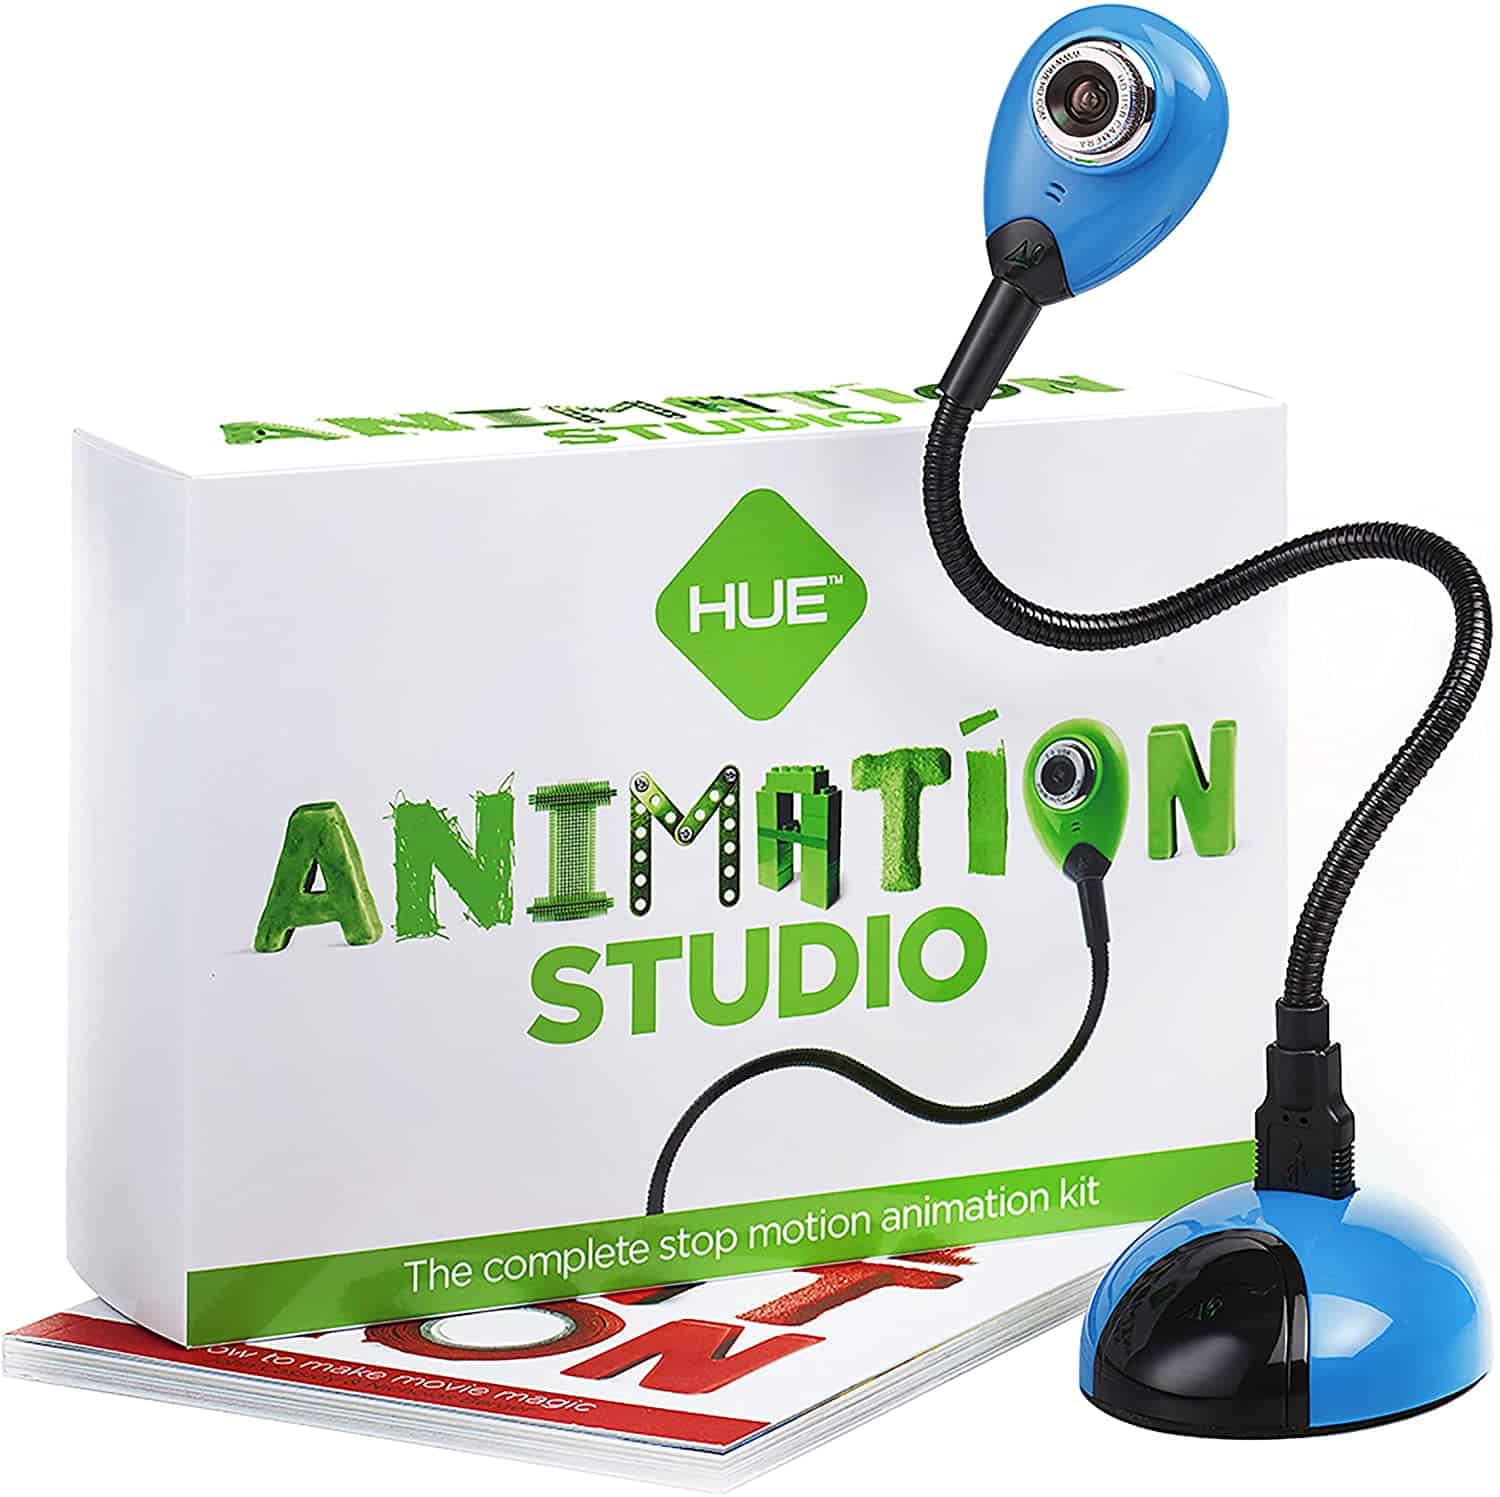 Best stop motion kit with camera- Hue Animation Studio Kit (for Windows)